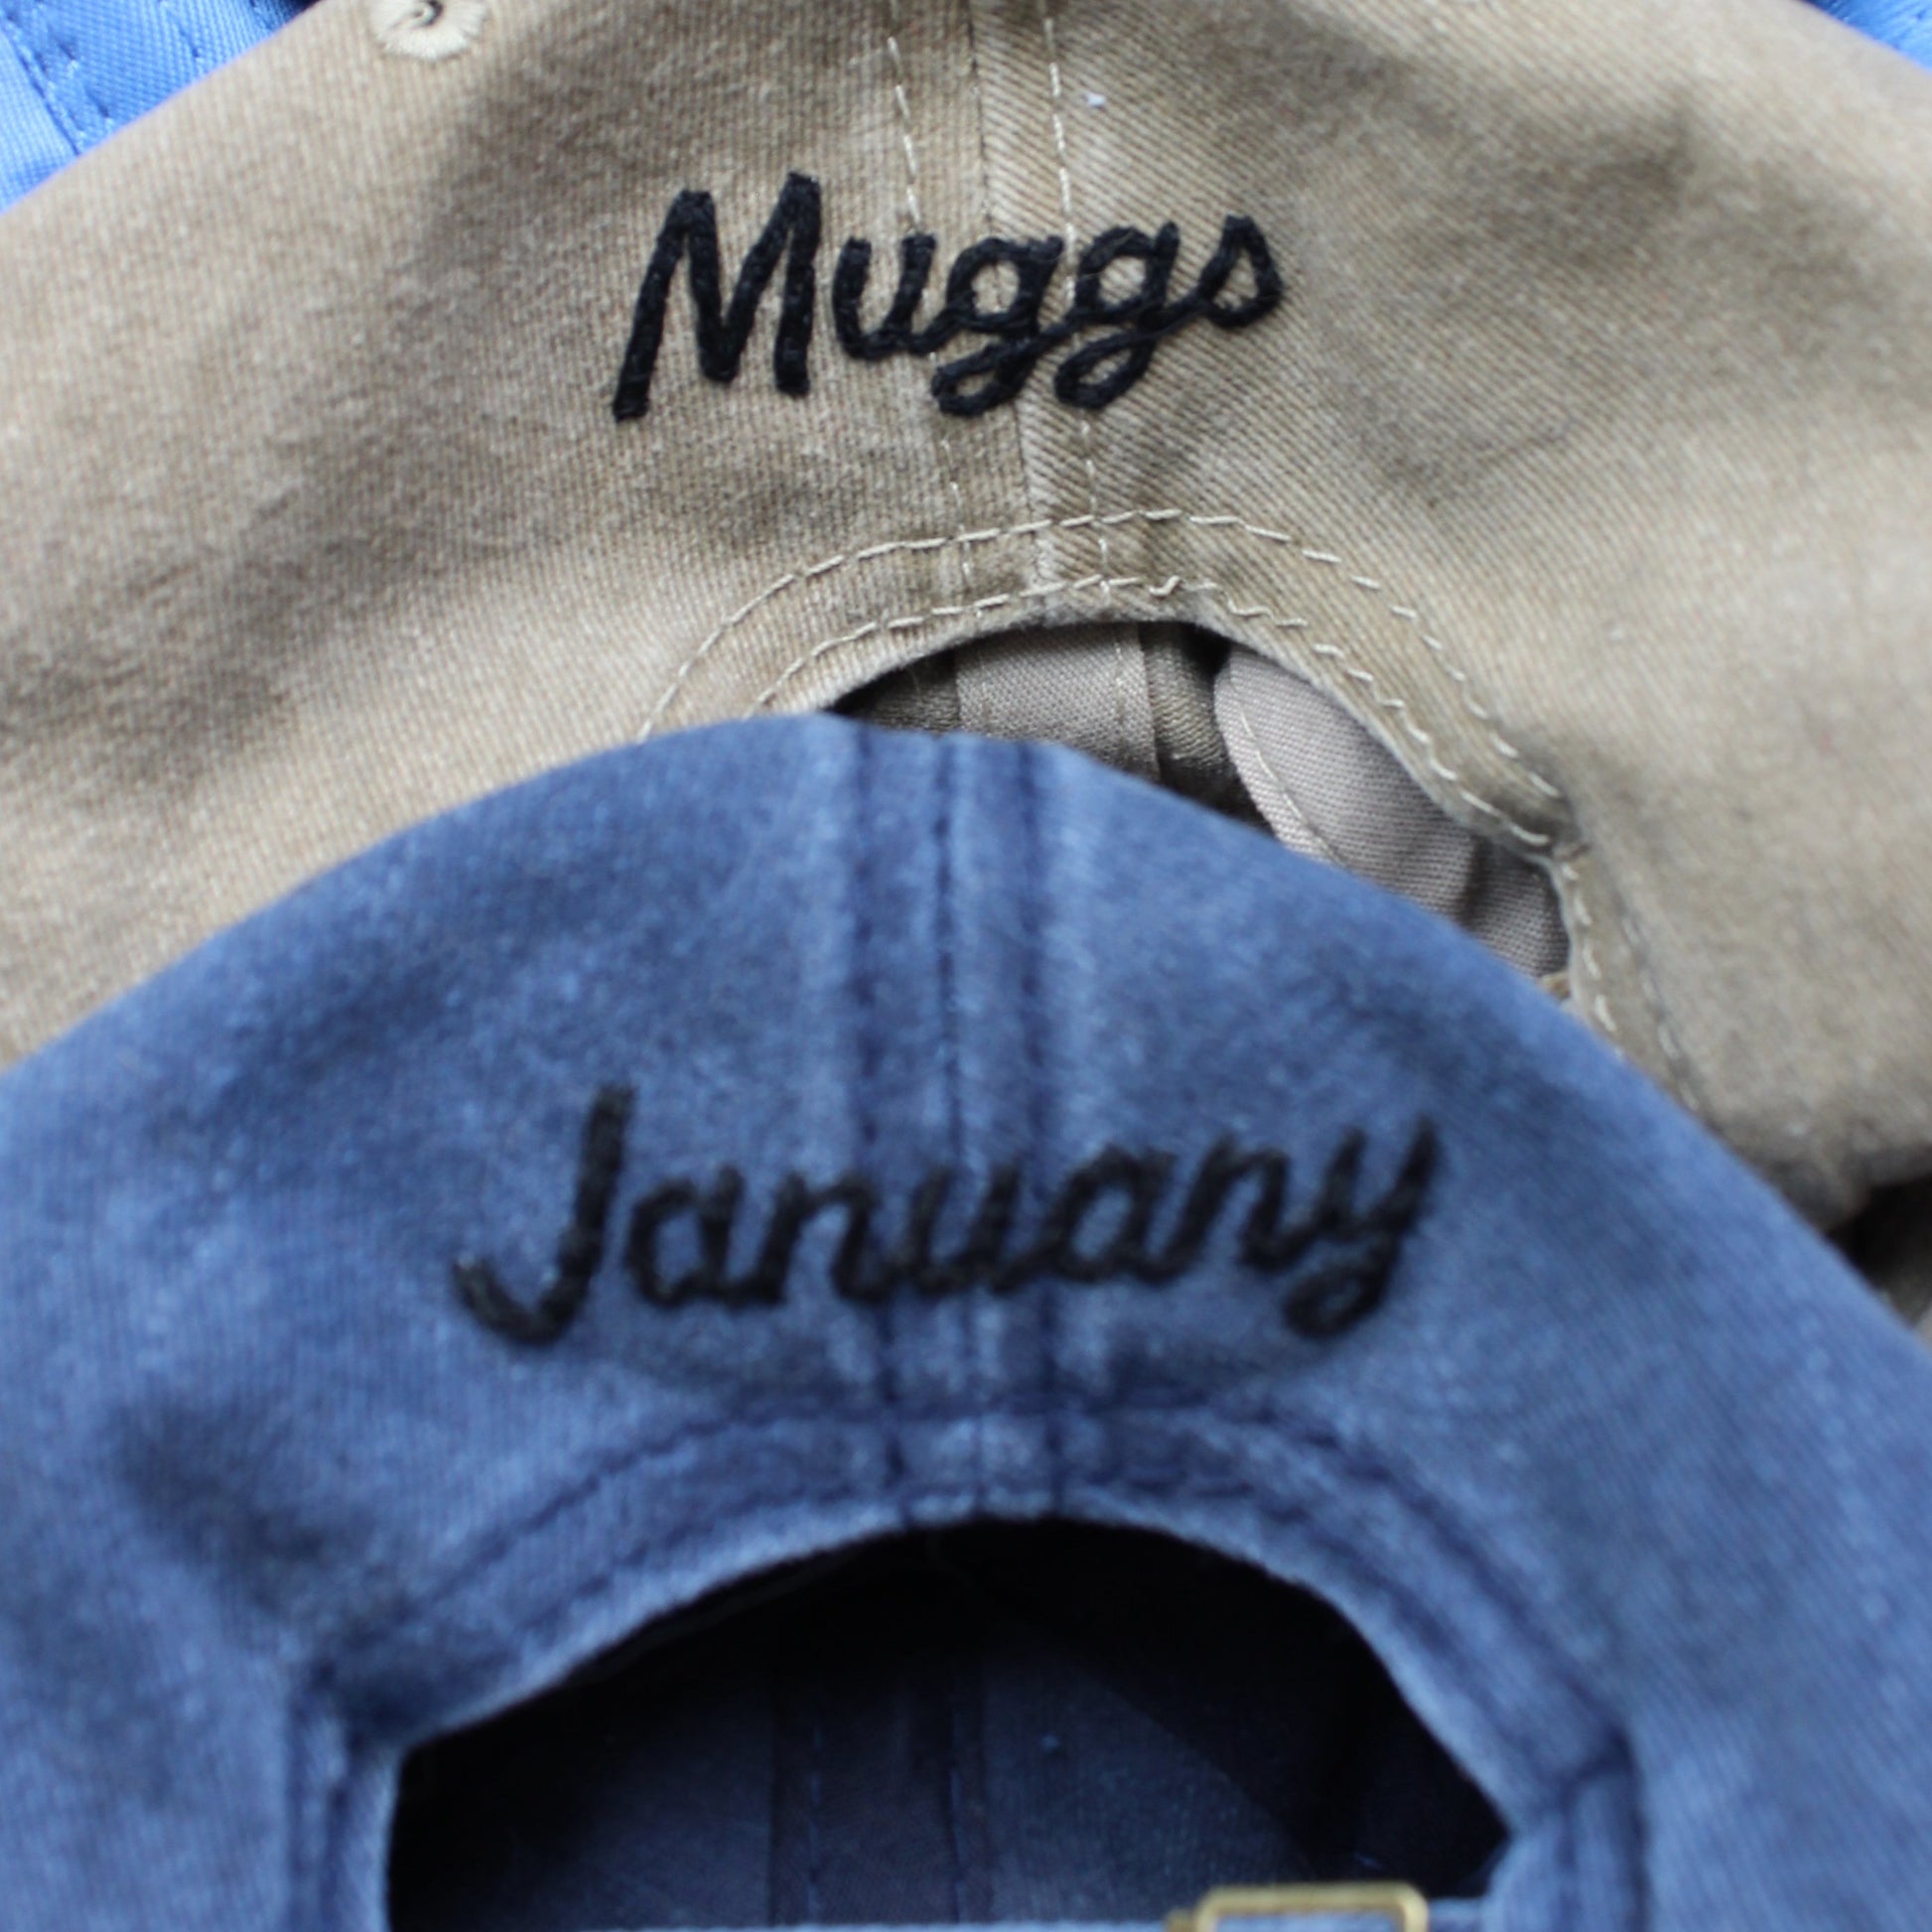 Name embroidery on the back of hats